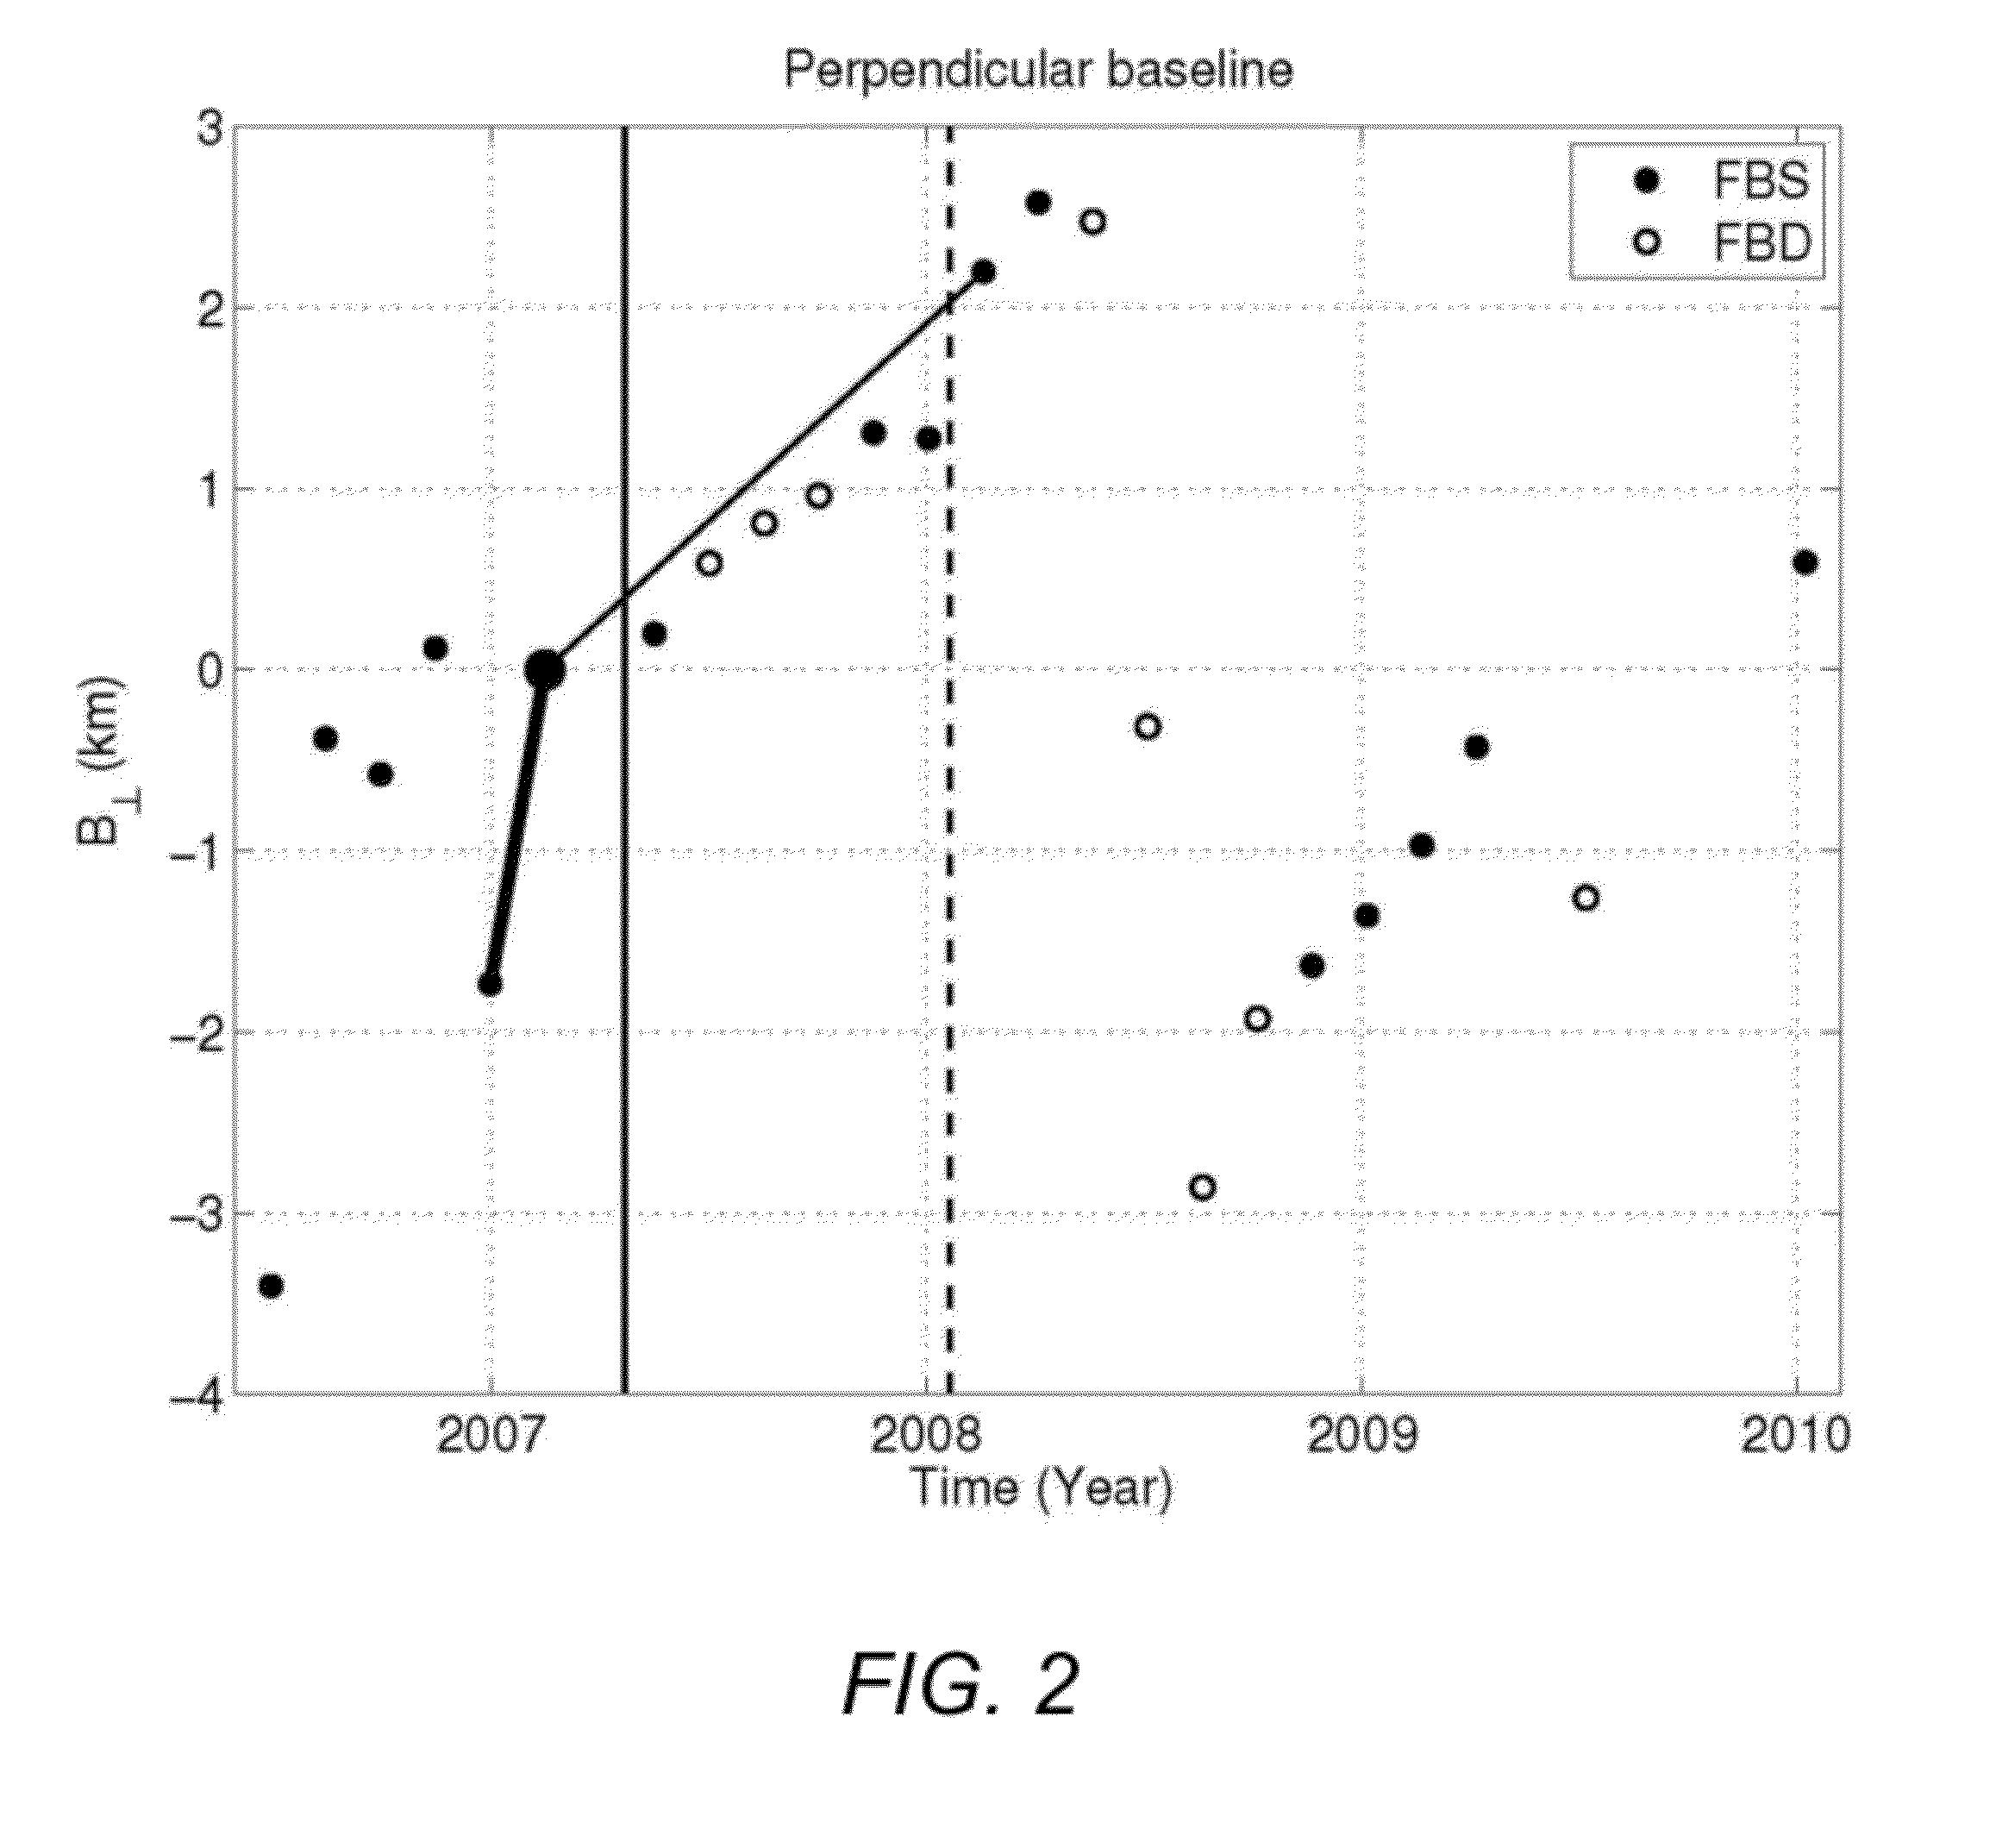 Damage proxy map from interferometric synthetic aperture radar coherence